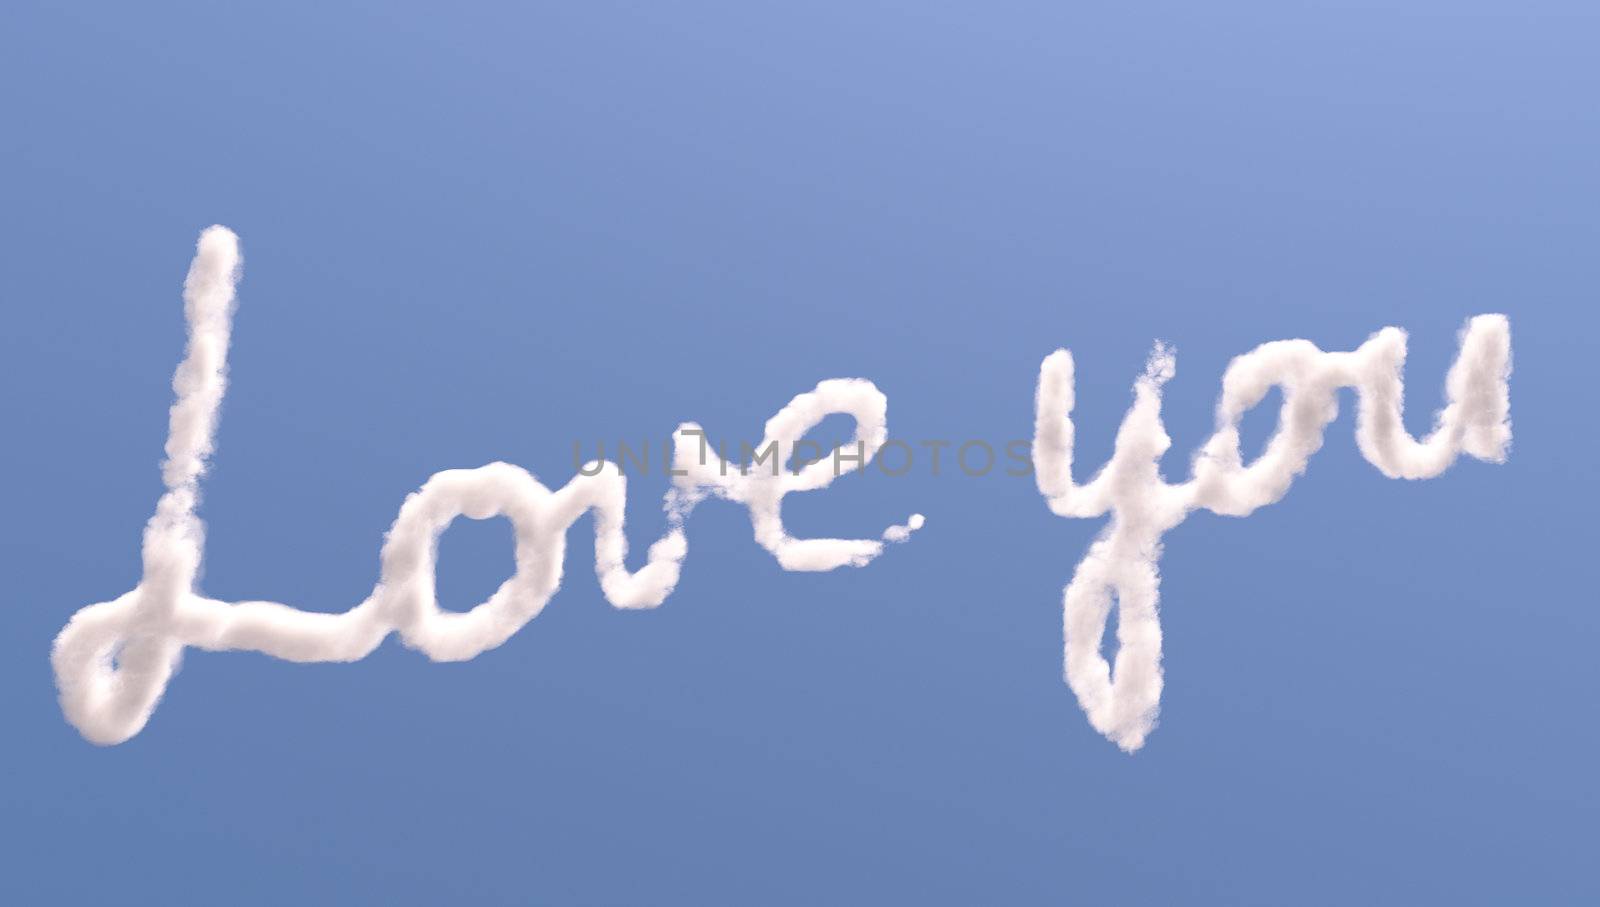 Love you text in sky, isolated on blue